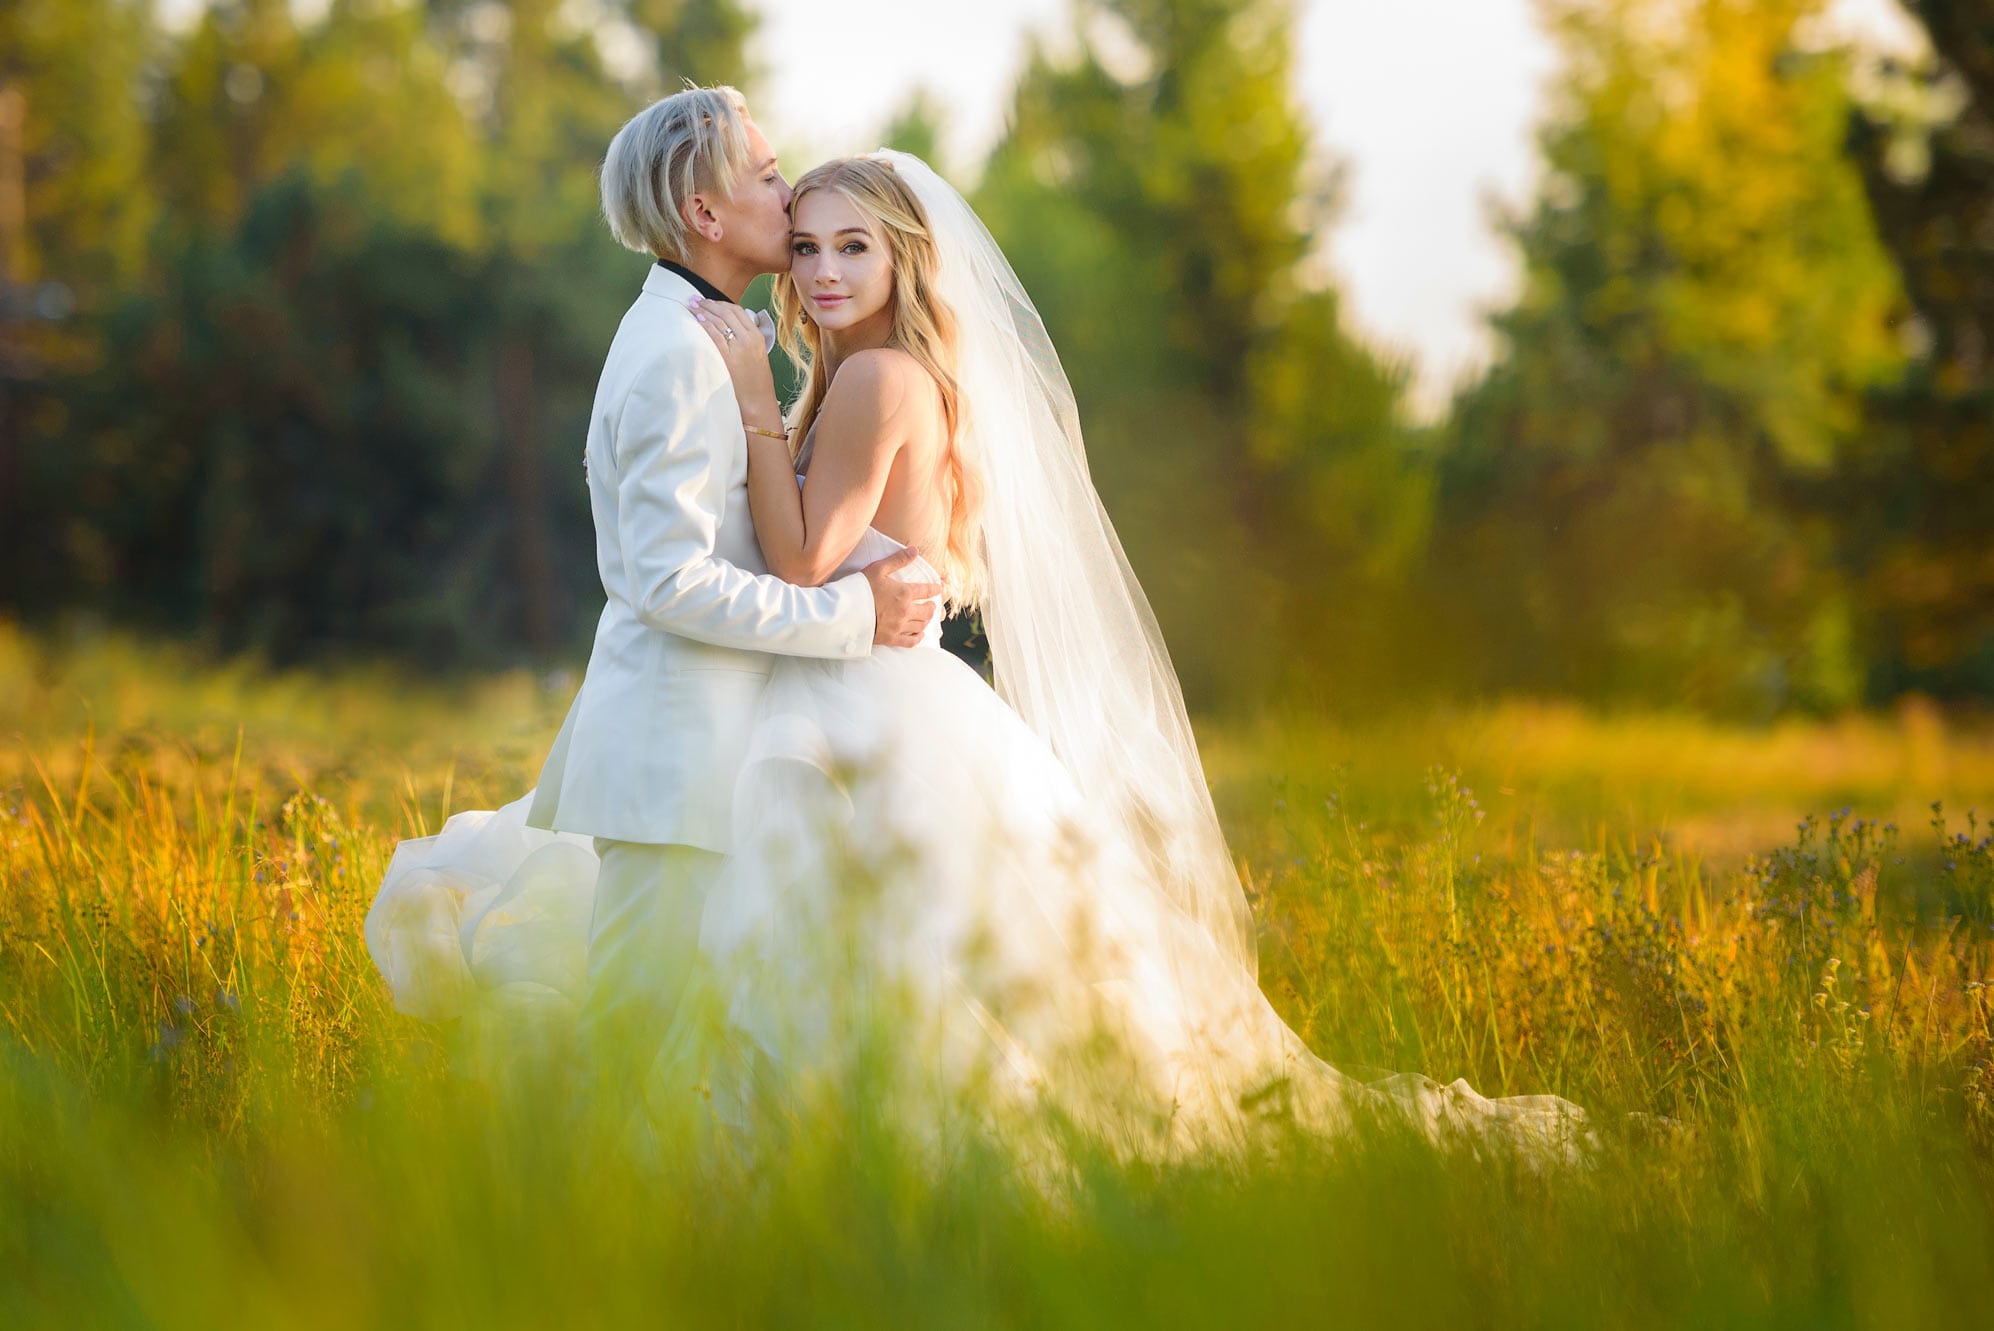 Lake Tahoe wedding photography for So You Think You Can Dance star Mollee Gray and Jeka Jane, Photography by Monique